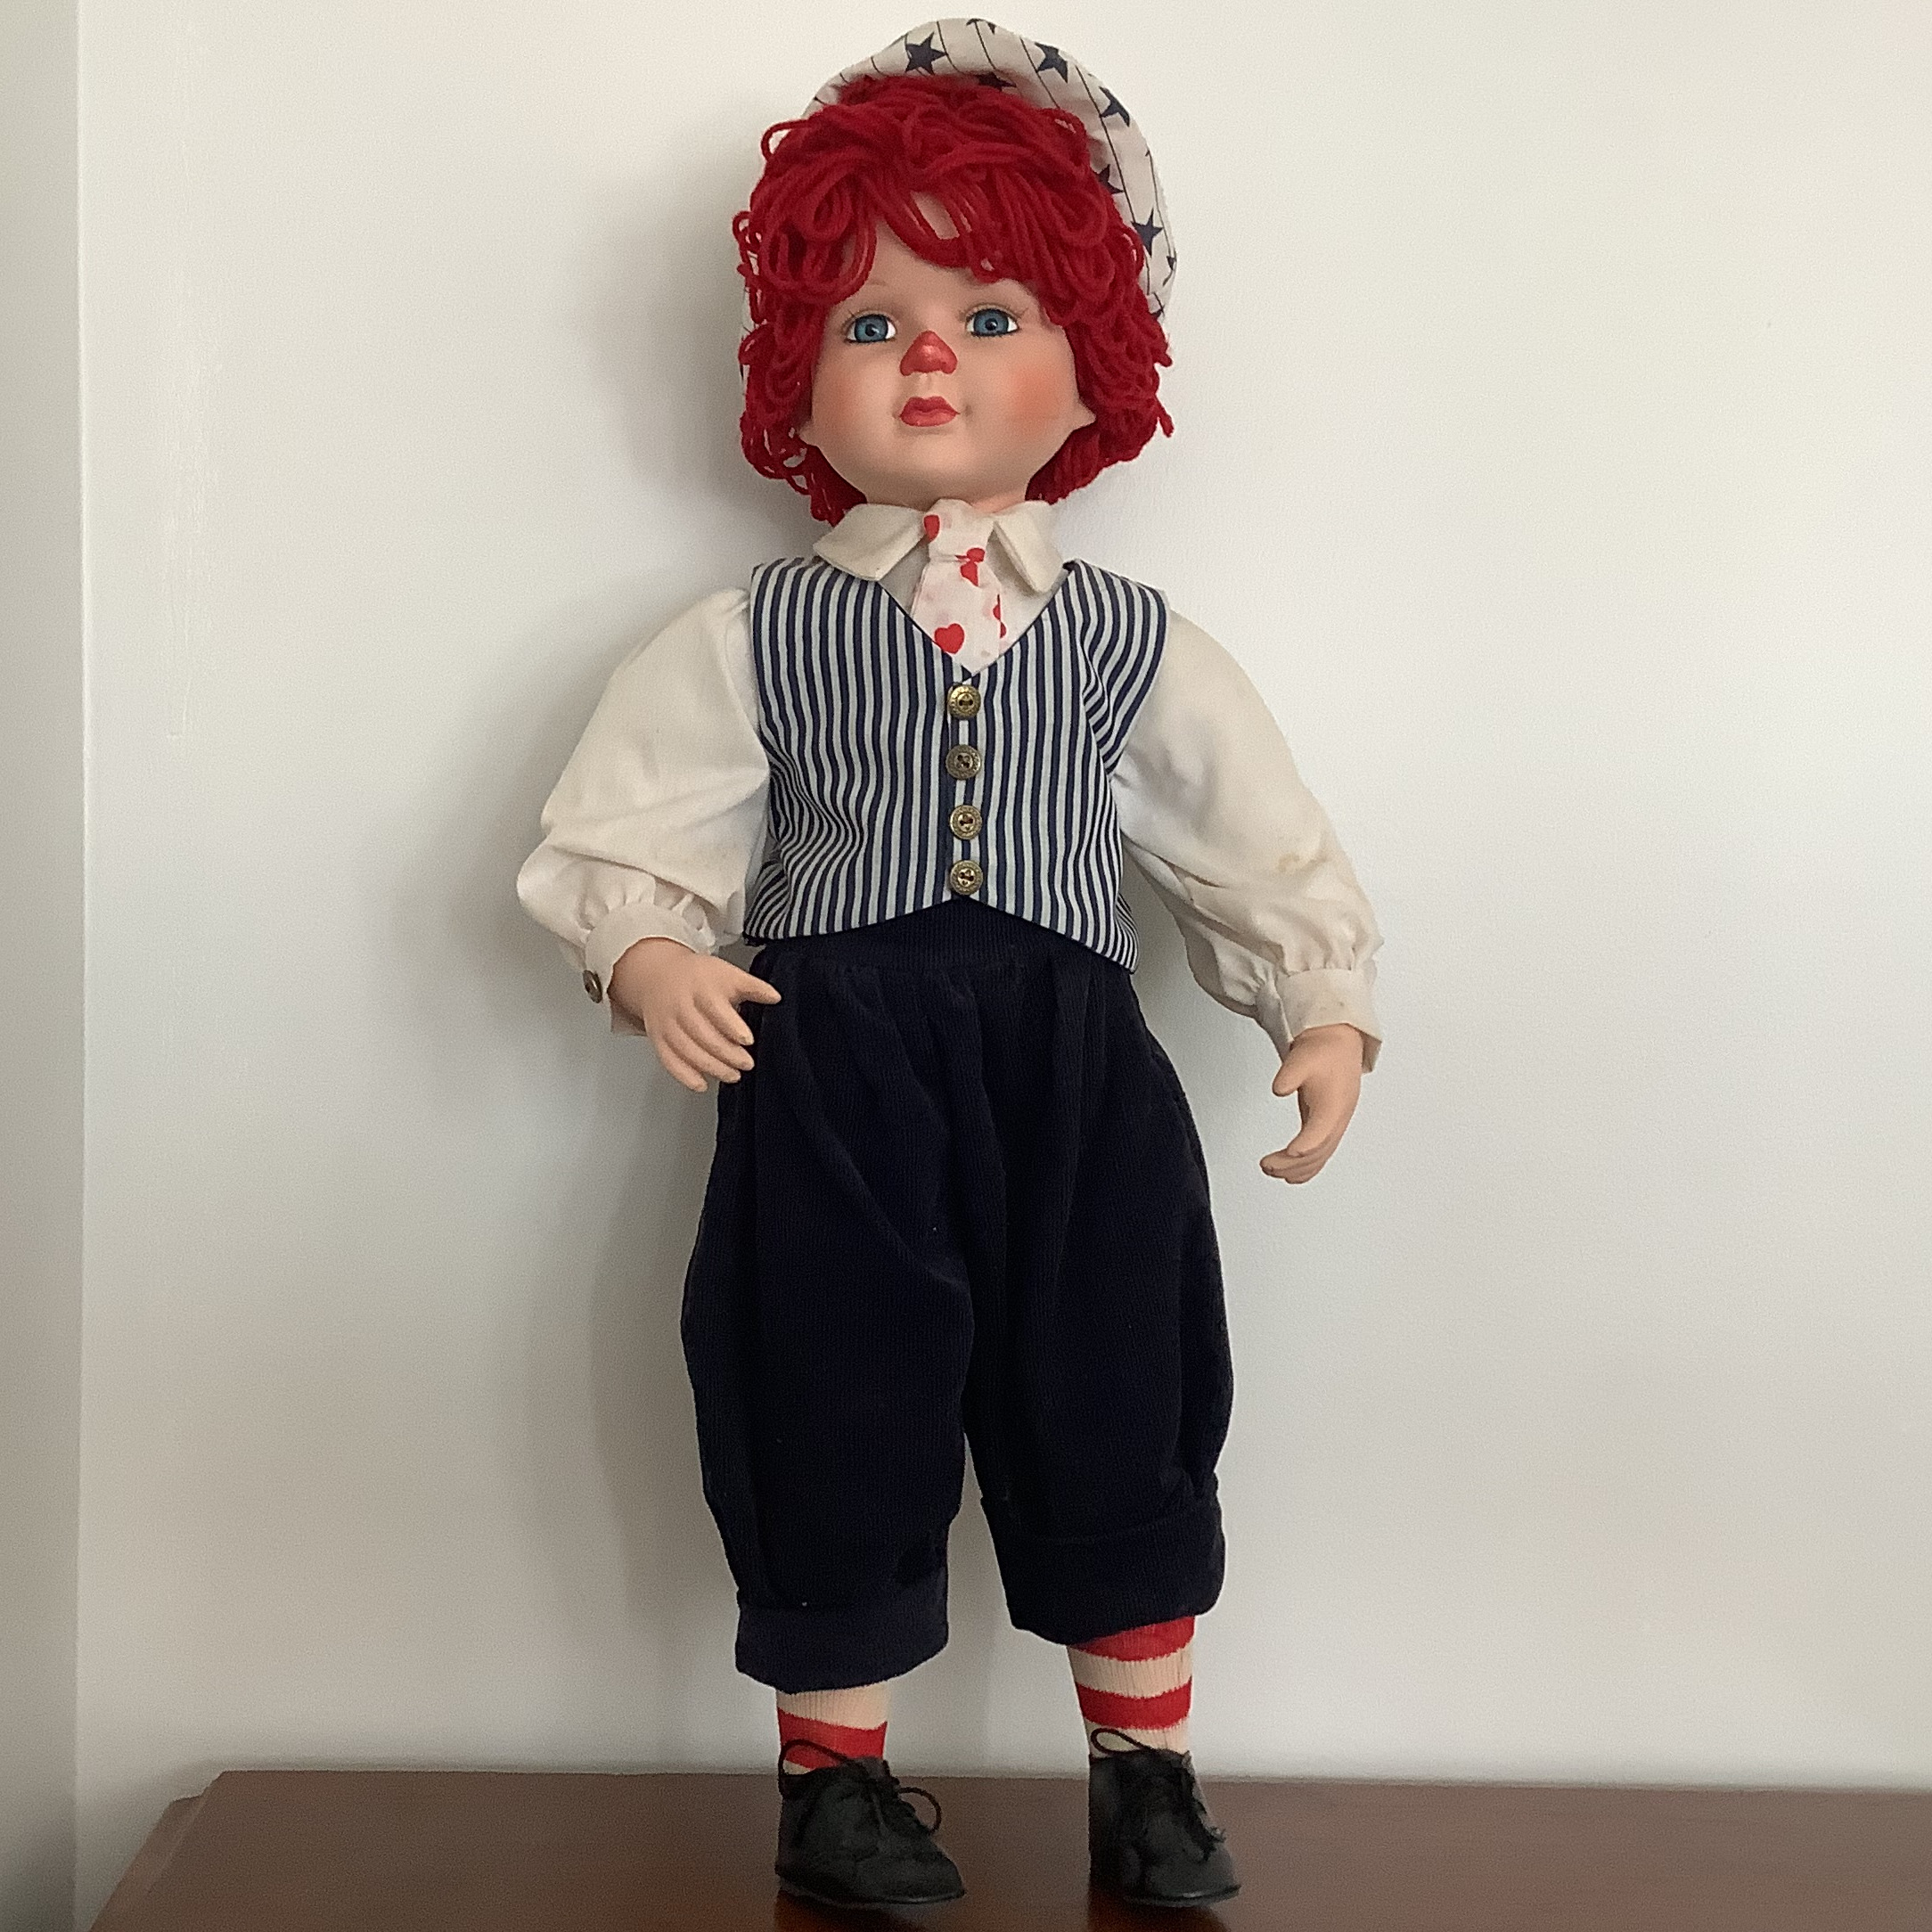 Reimagined Raggedy Andy doll with porcelain child's face painted to resemble the doll and curly yarn hair, with shit shirt, striped white and navy waistcoat, and navy trousers